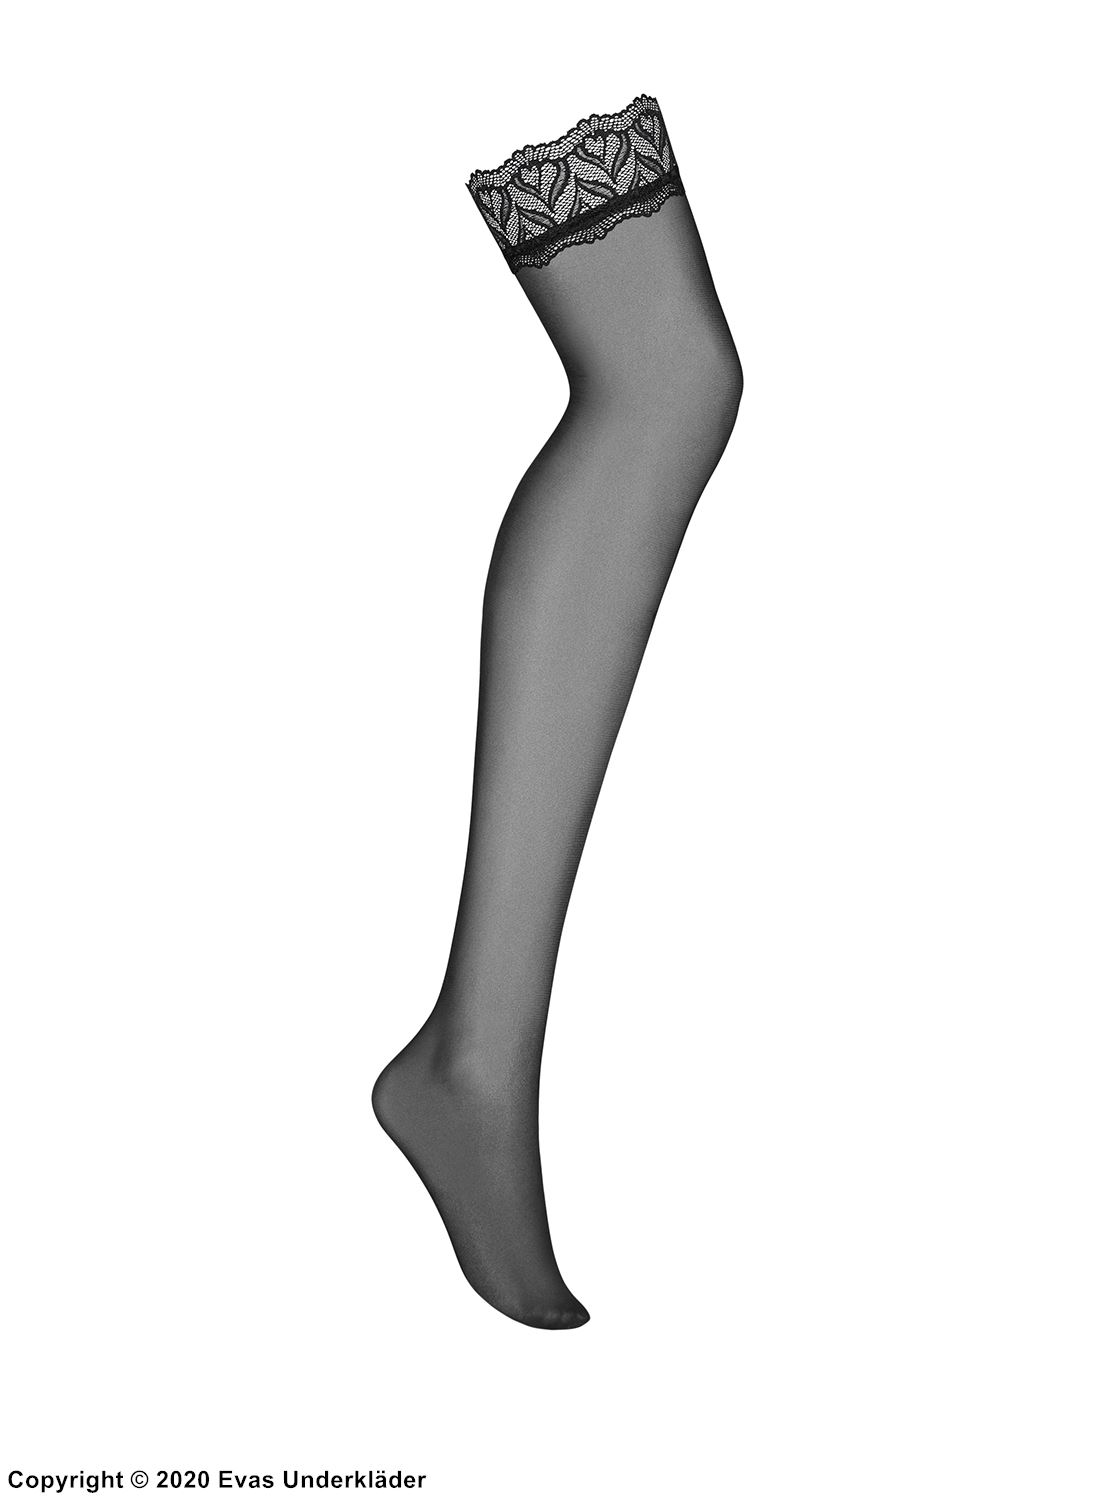 Thigh high stockings, lace trim